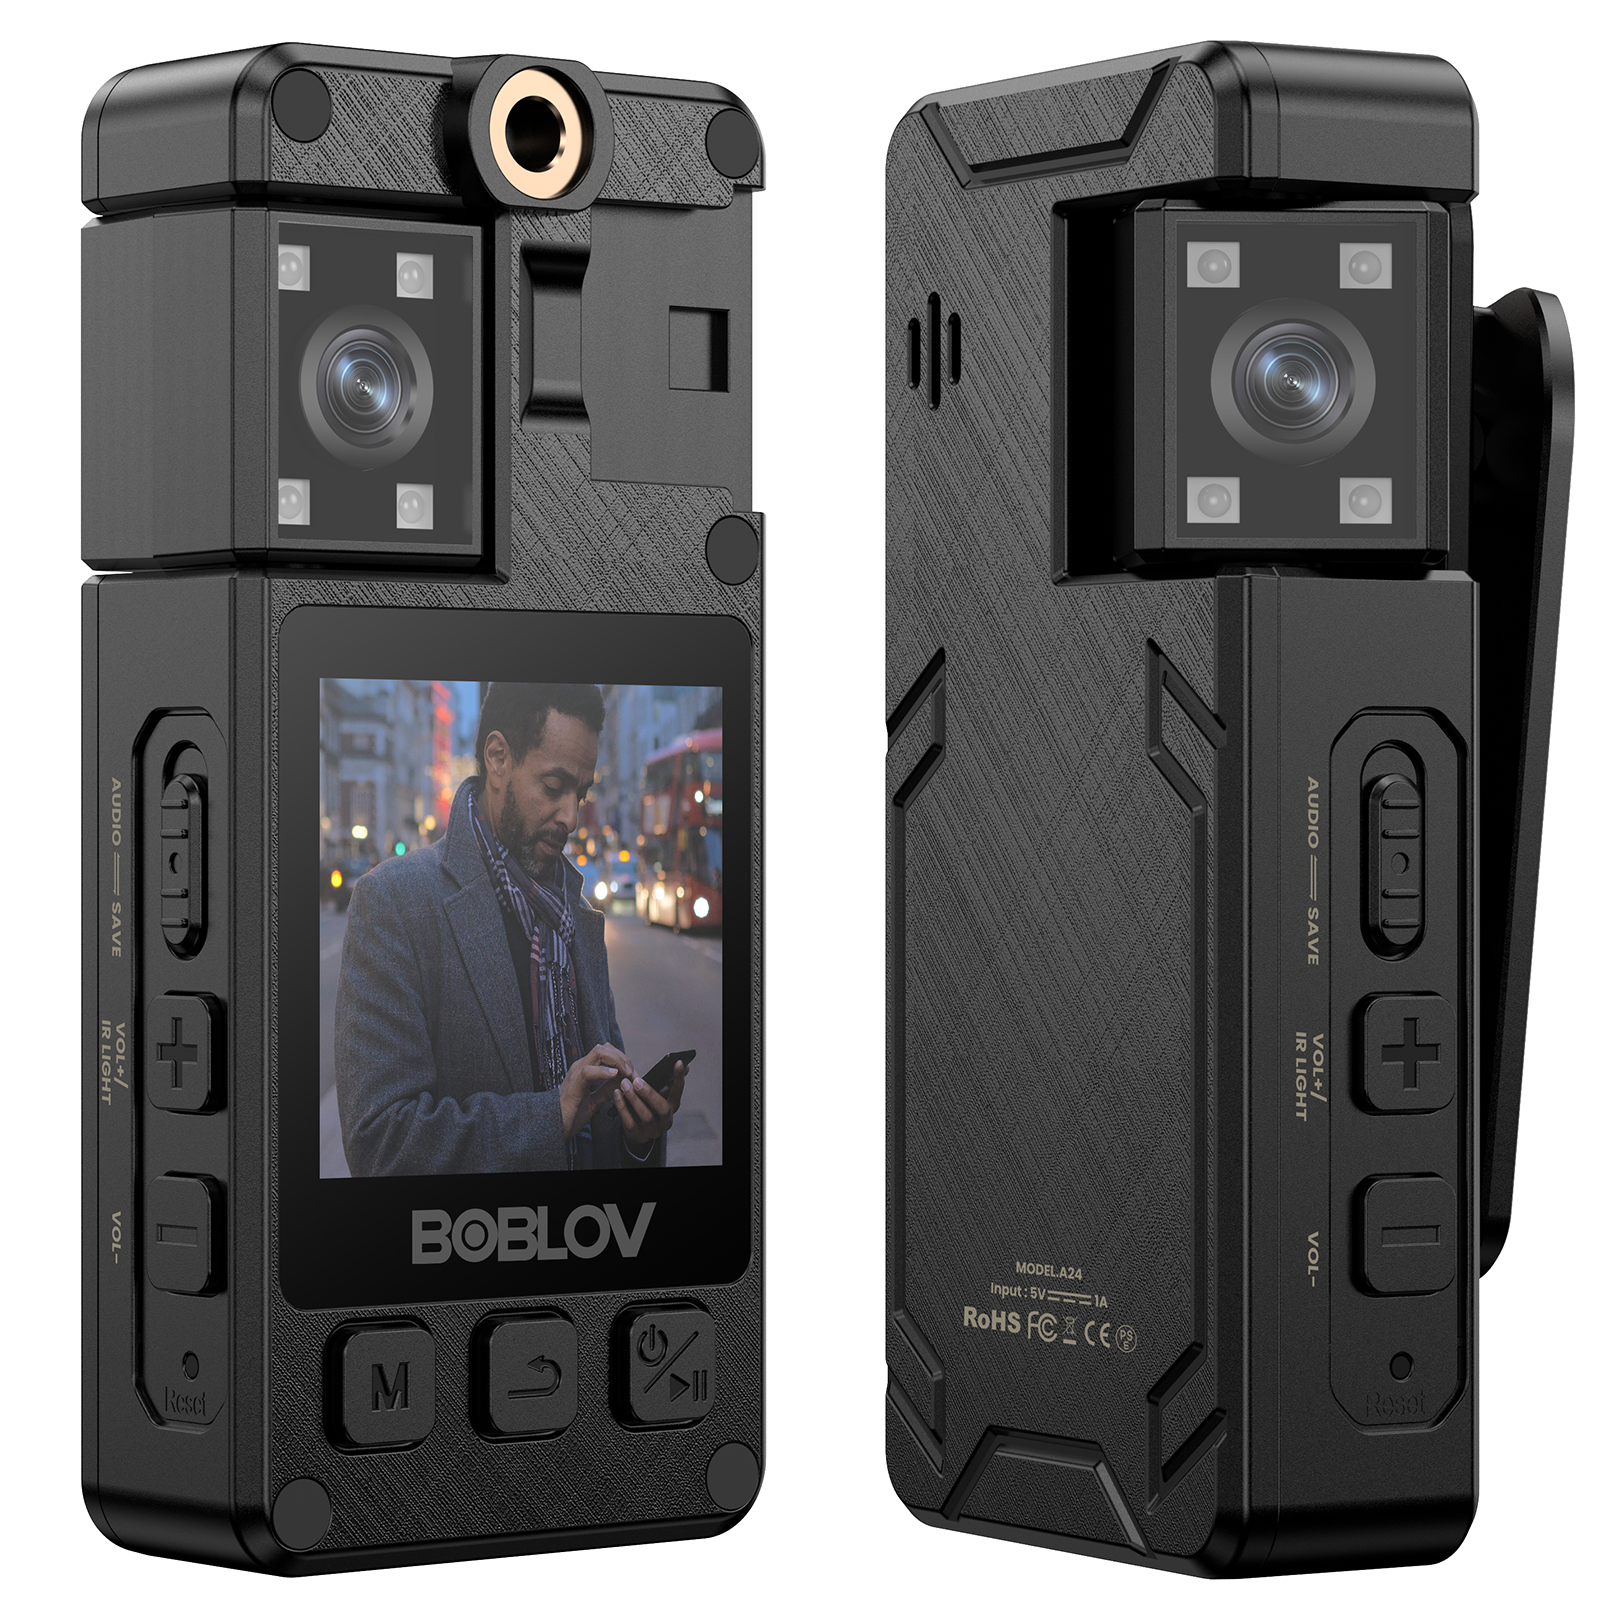 BOBLOV A24 1296P Mini Body Camera with 64GB storage and 180-degree rotation, capable of 8 hours video recording0